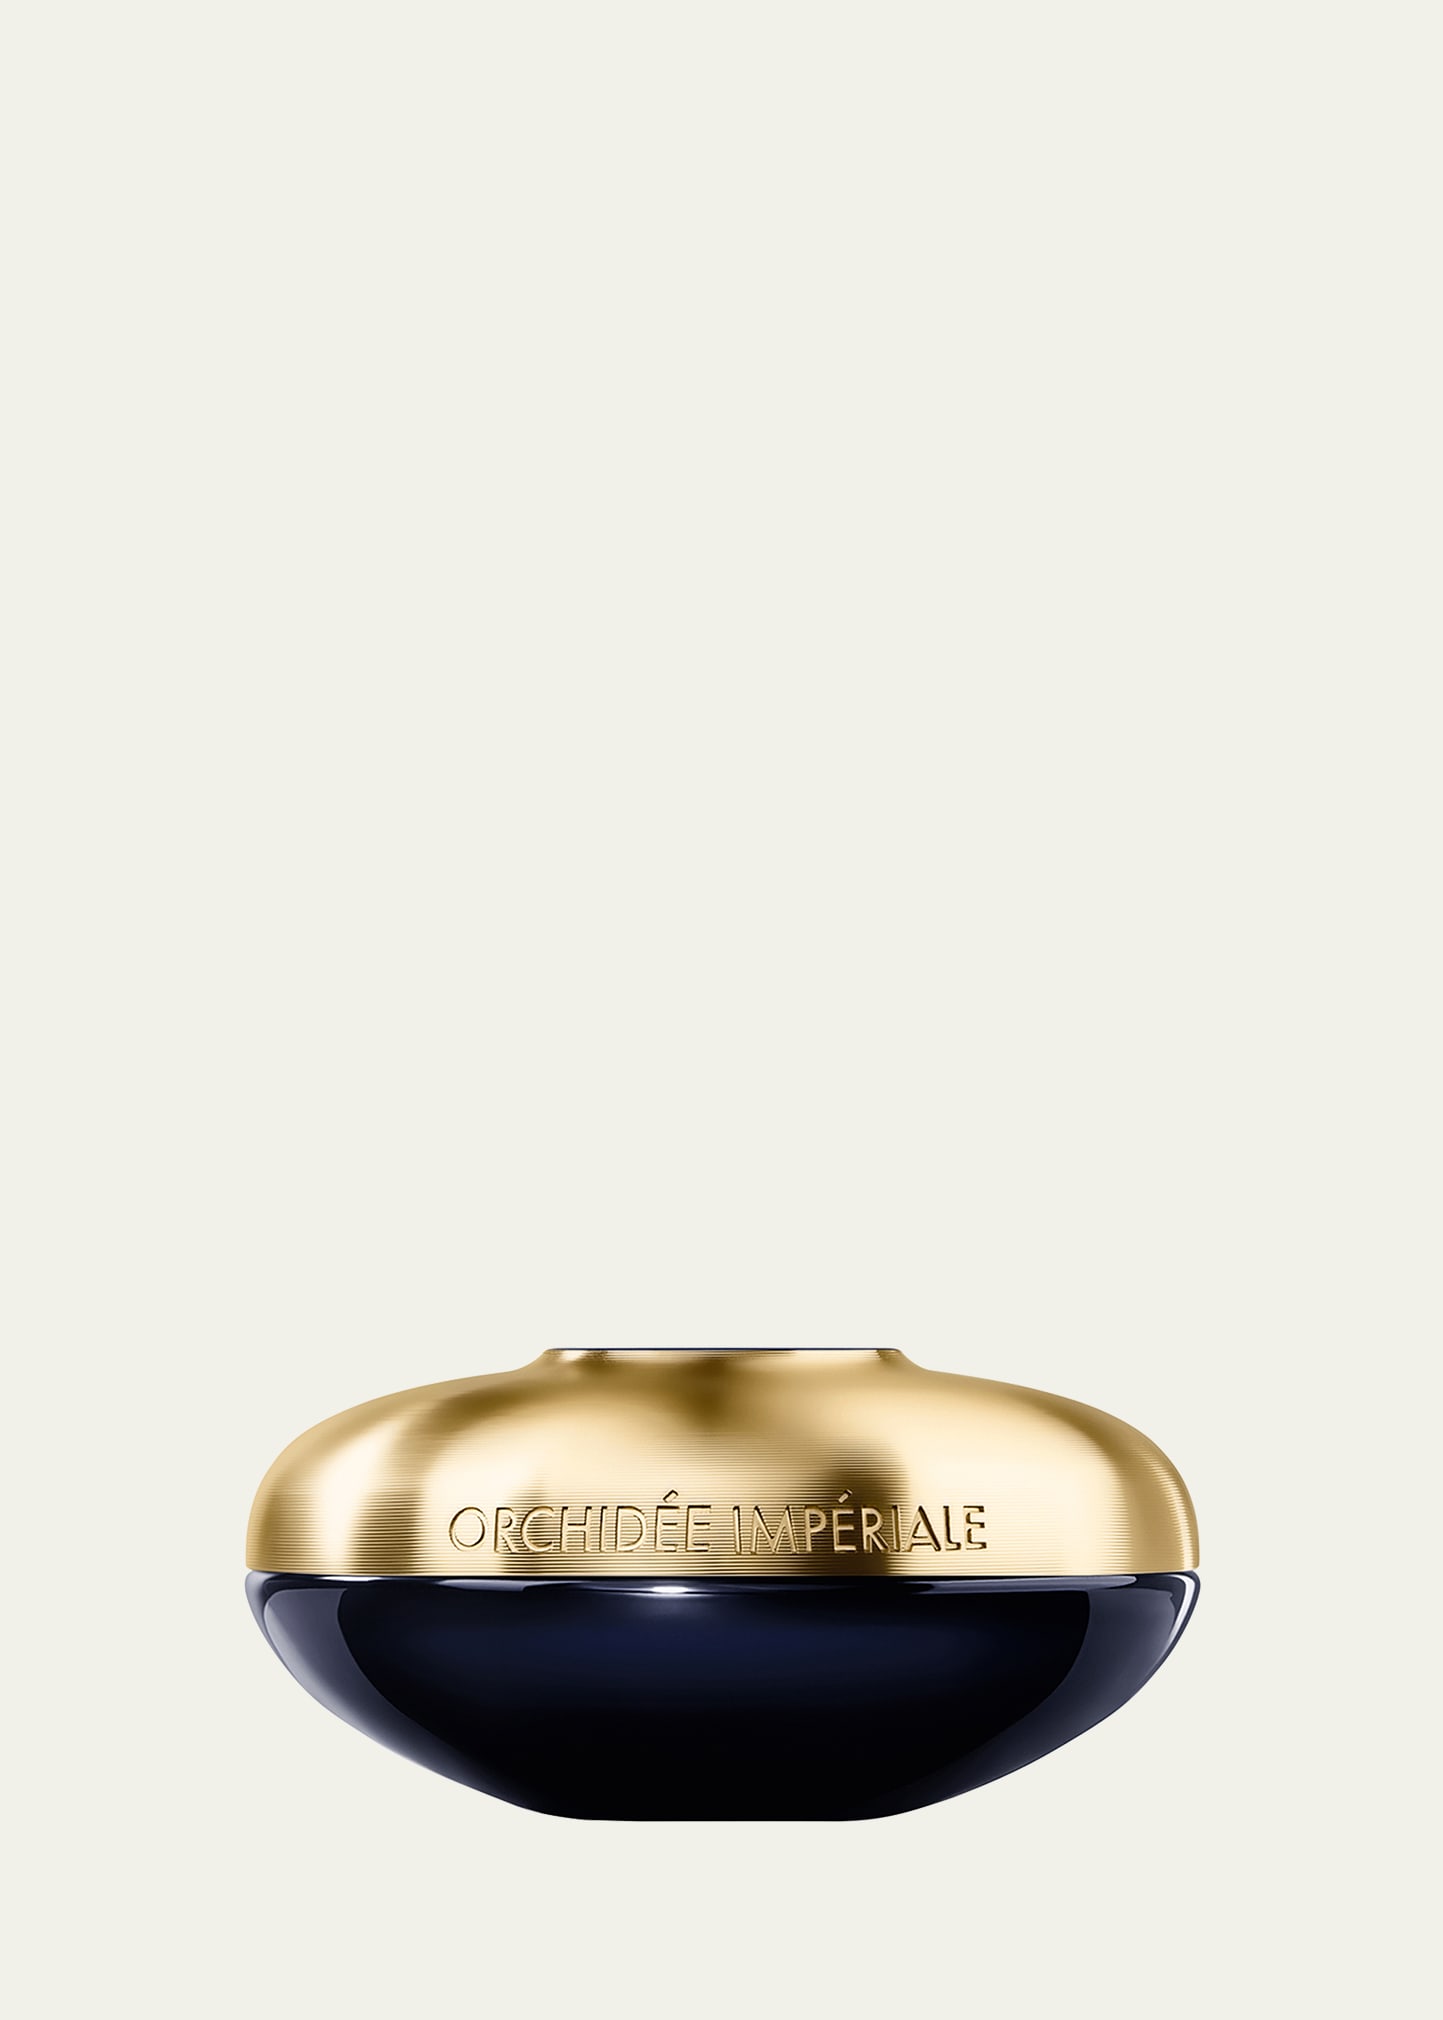 Orchidee Imperiale The Rich Cream 1.7 oz.